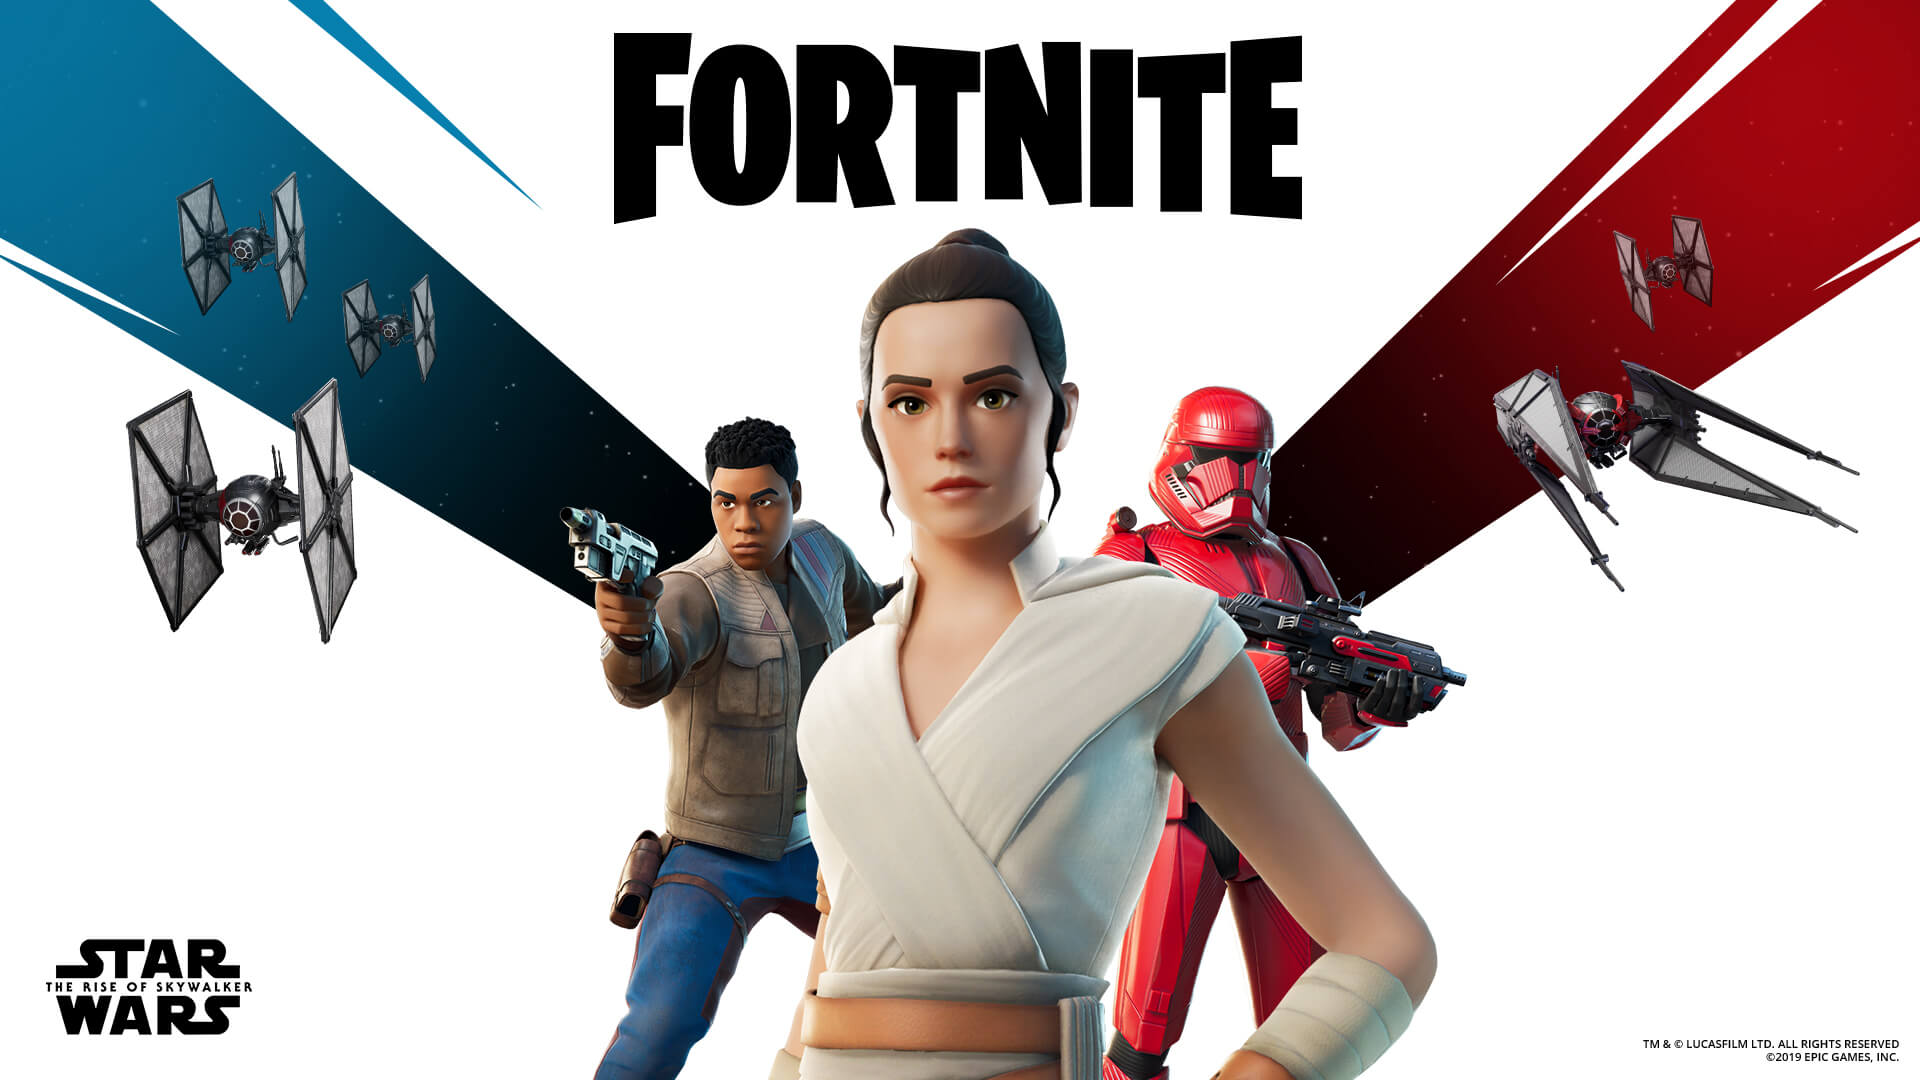 Star Wars: The Rise of Skywalker Preview Event Coming to Fortnite December 14